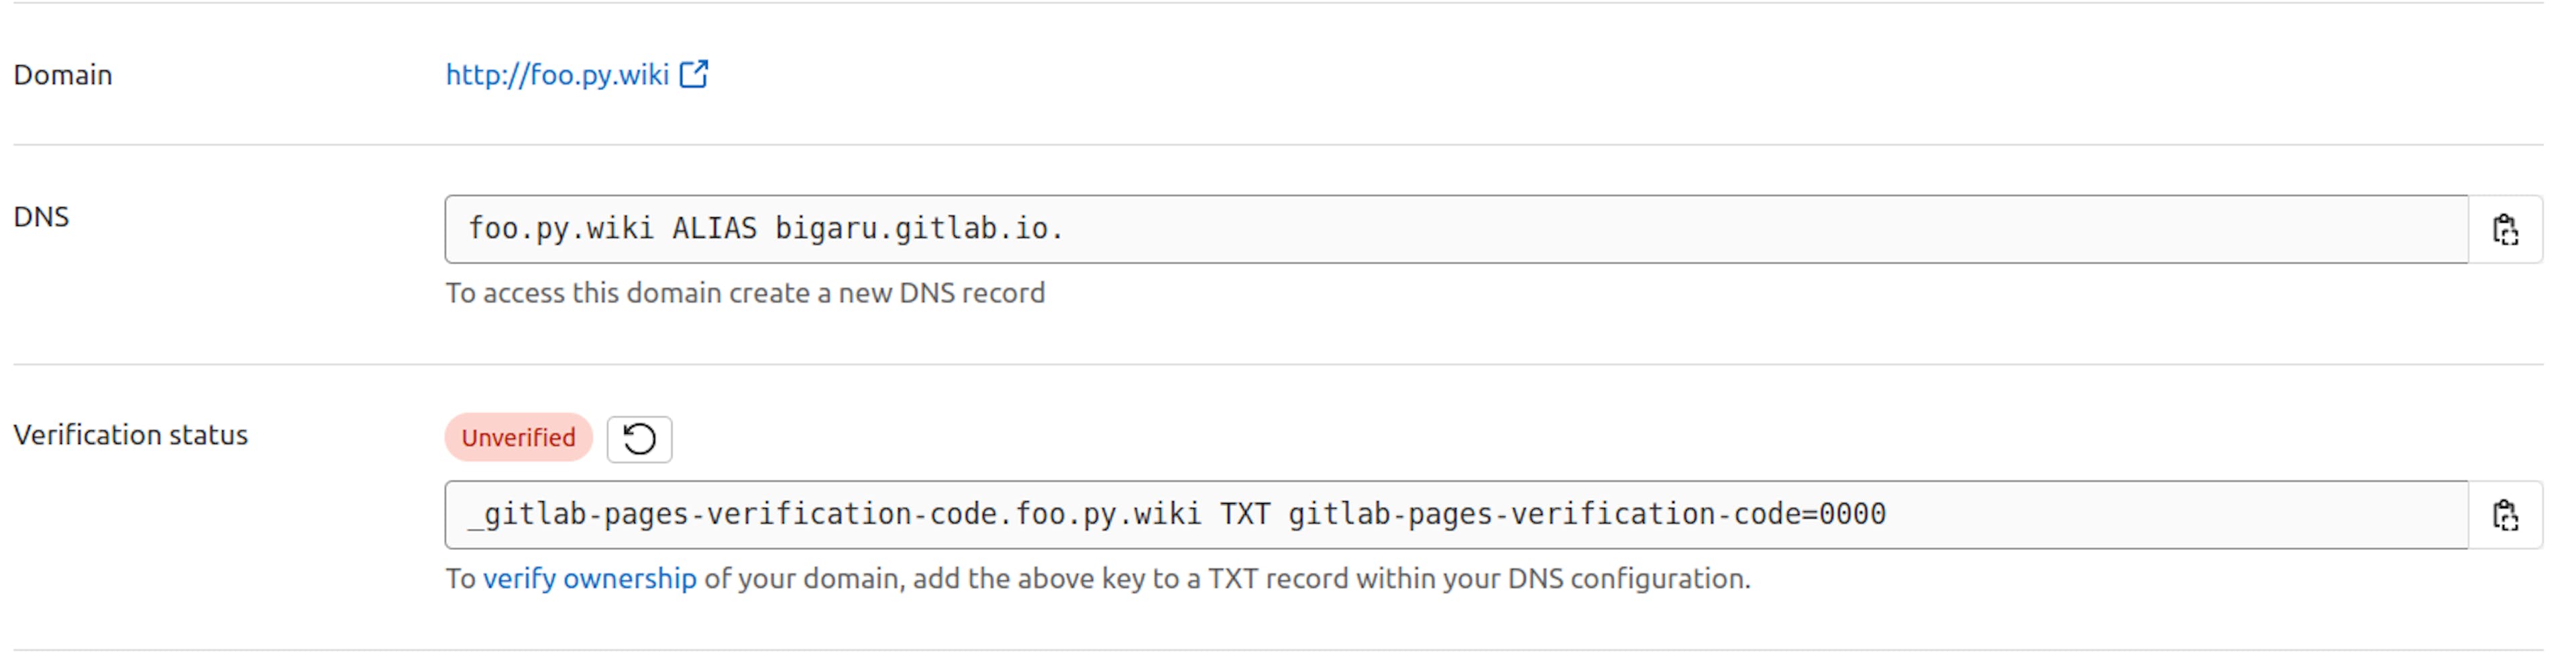 GitLab Pages - new domain